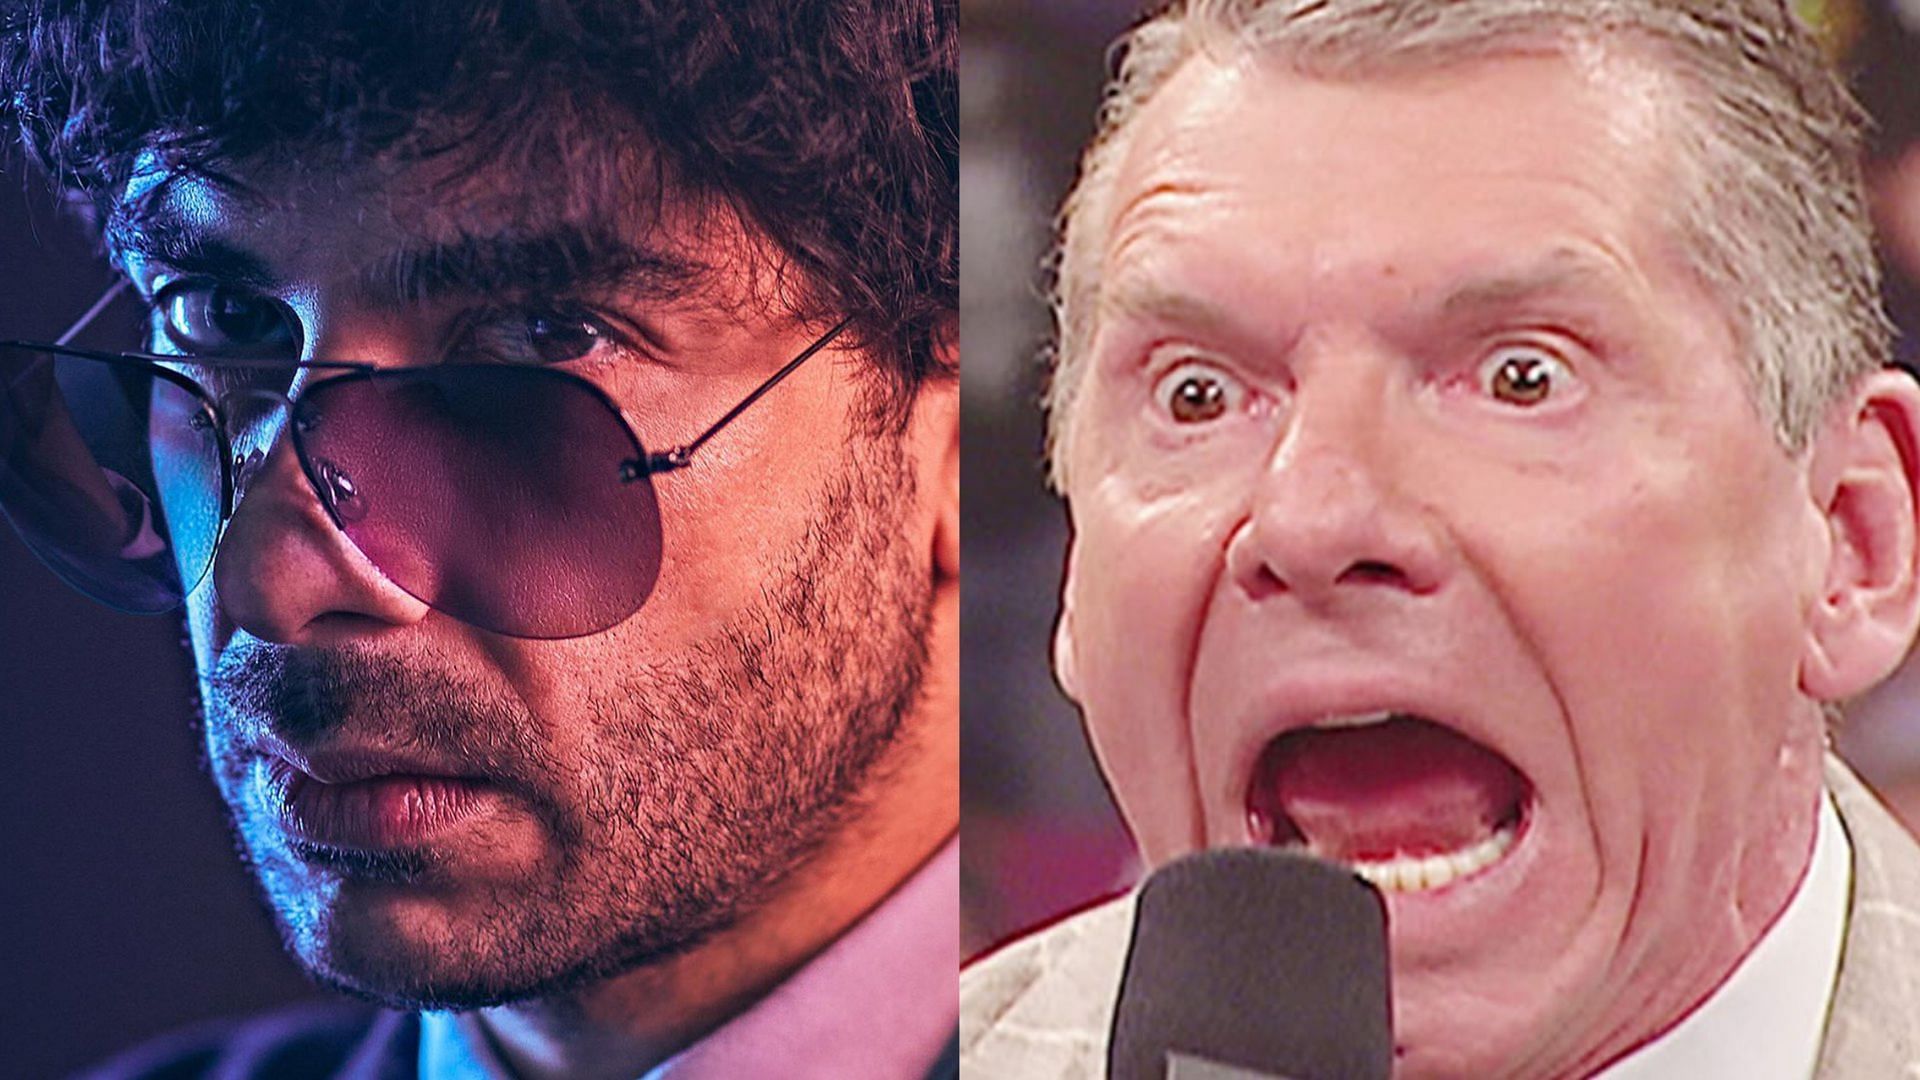 What has Vince McMahon done in his career that Tony Khan could learn from?